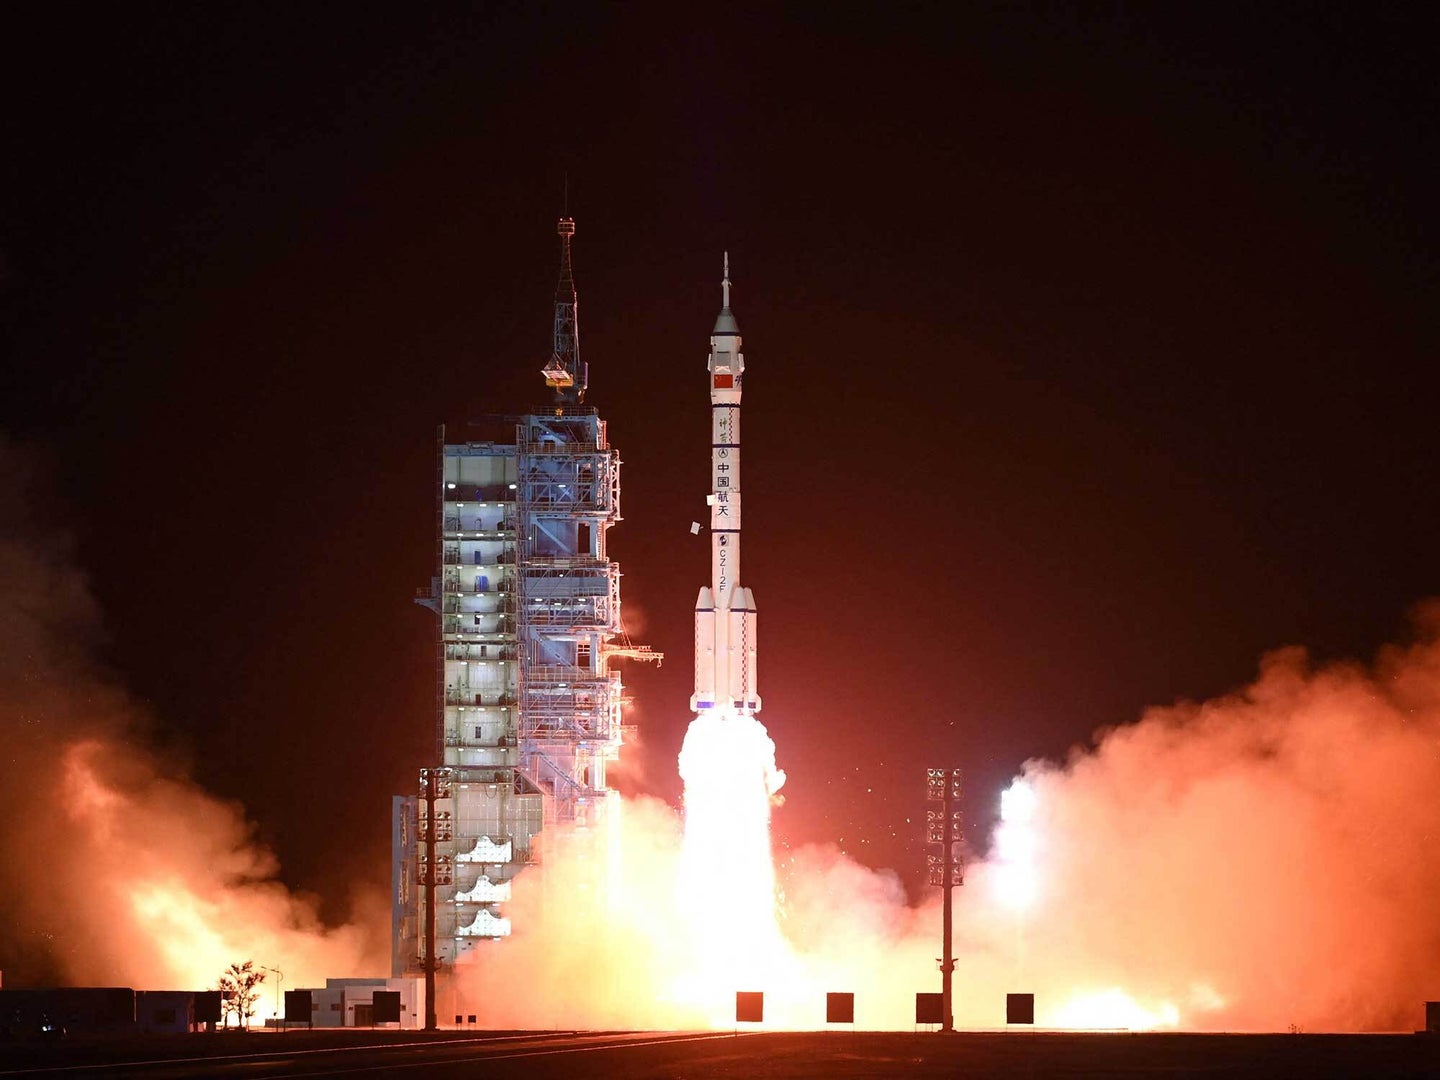 Chinese space rocket lifting off at night